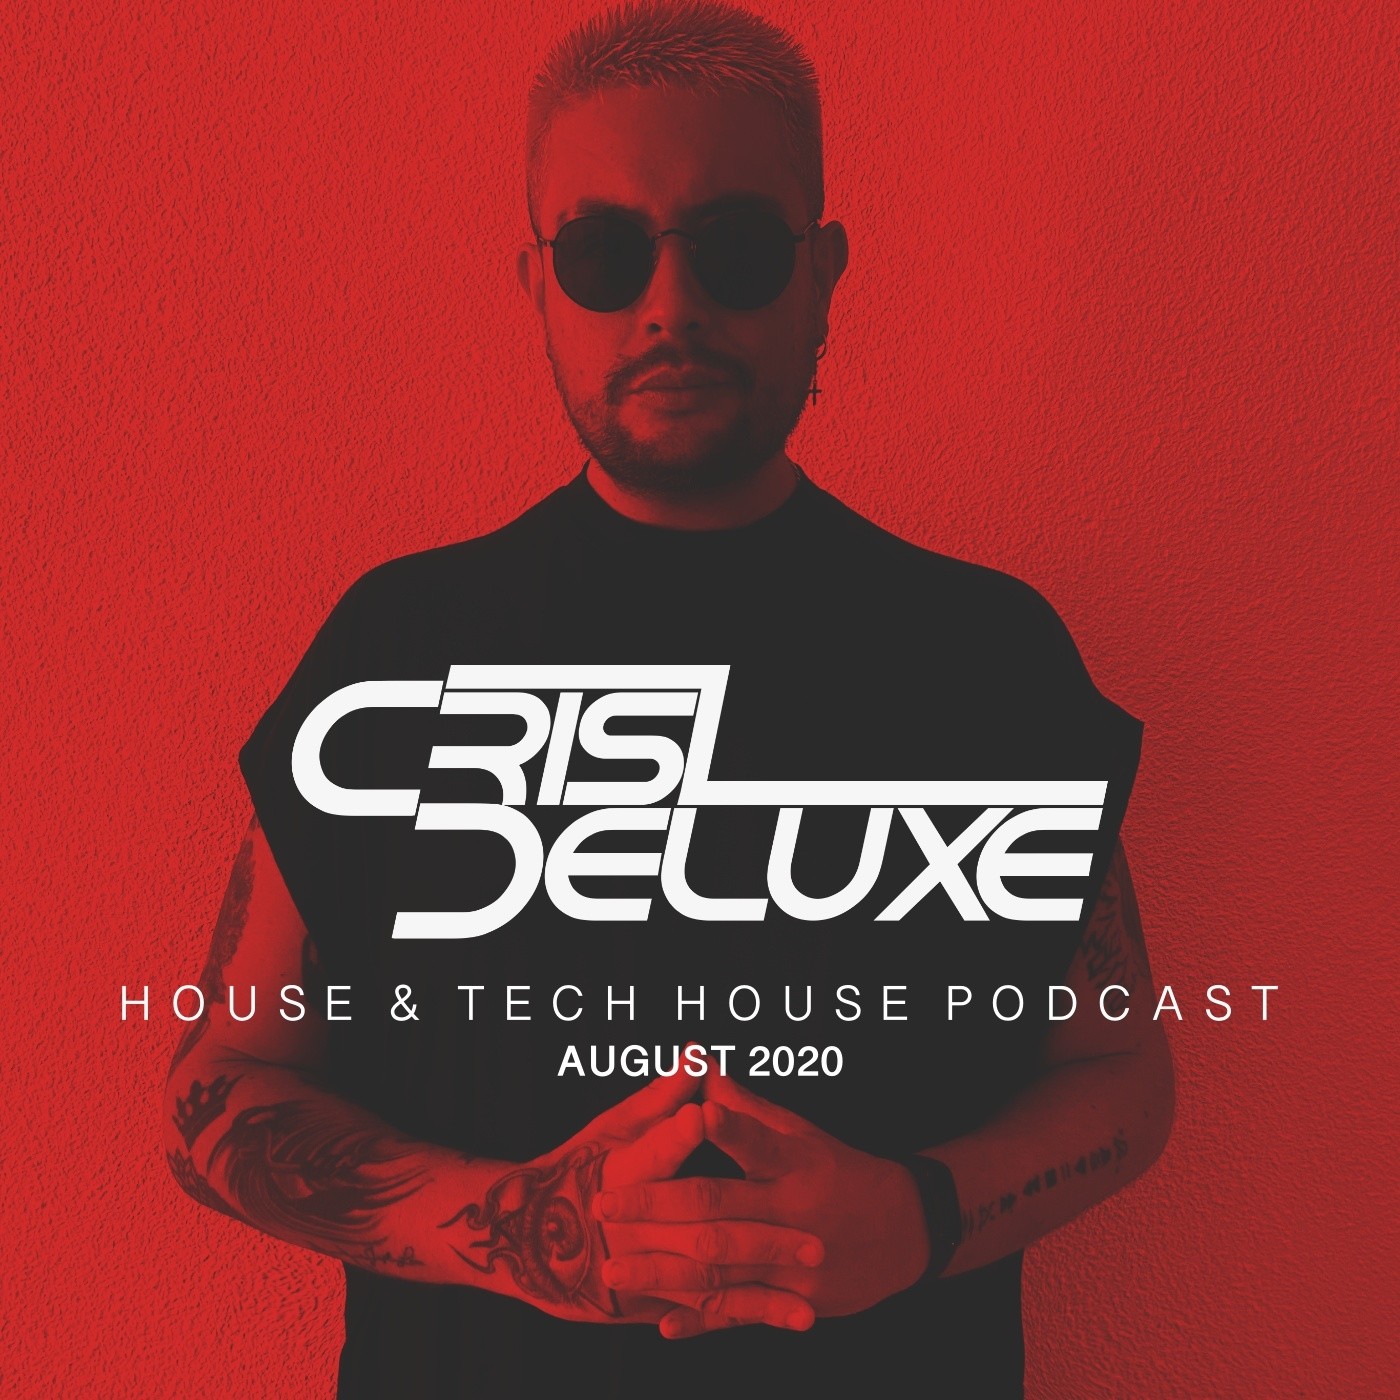 Crisdeluxe - House & Tech House Podcast (August 20